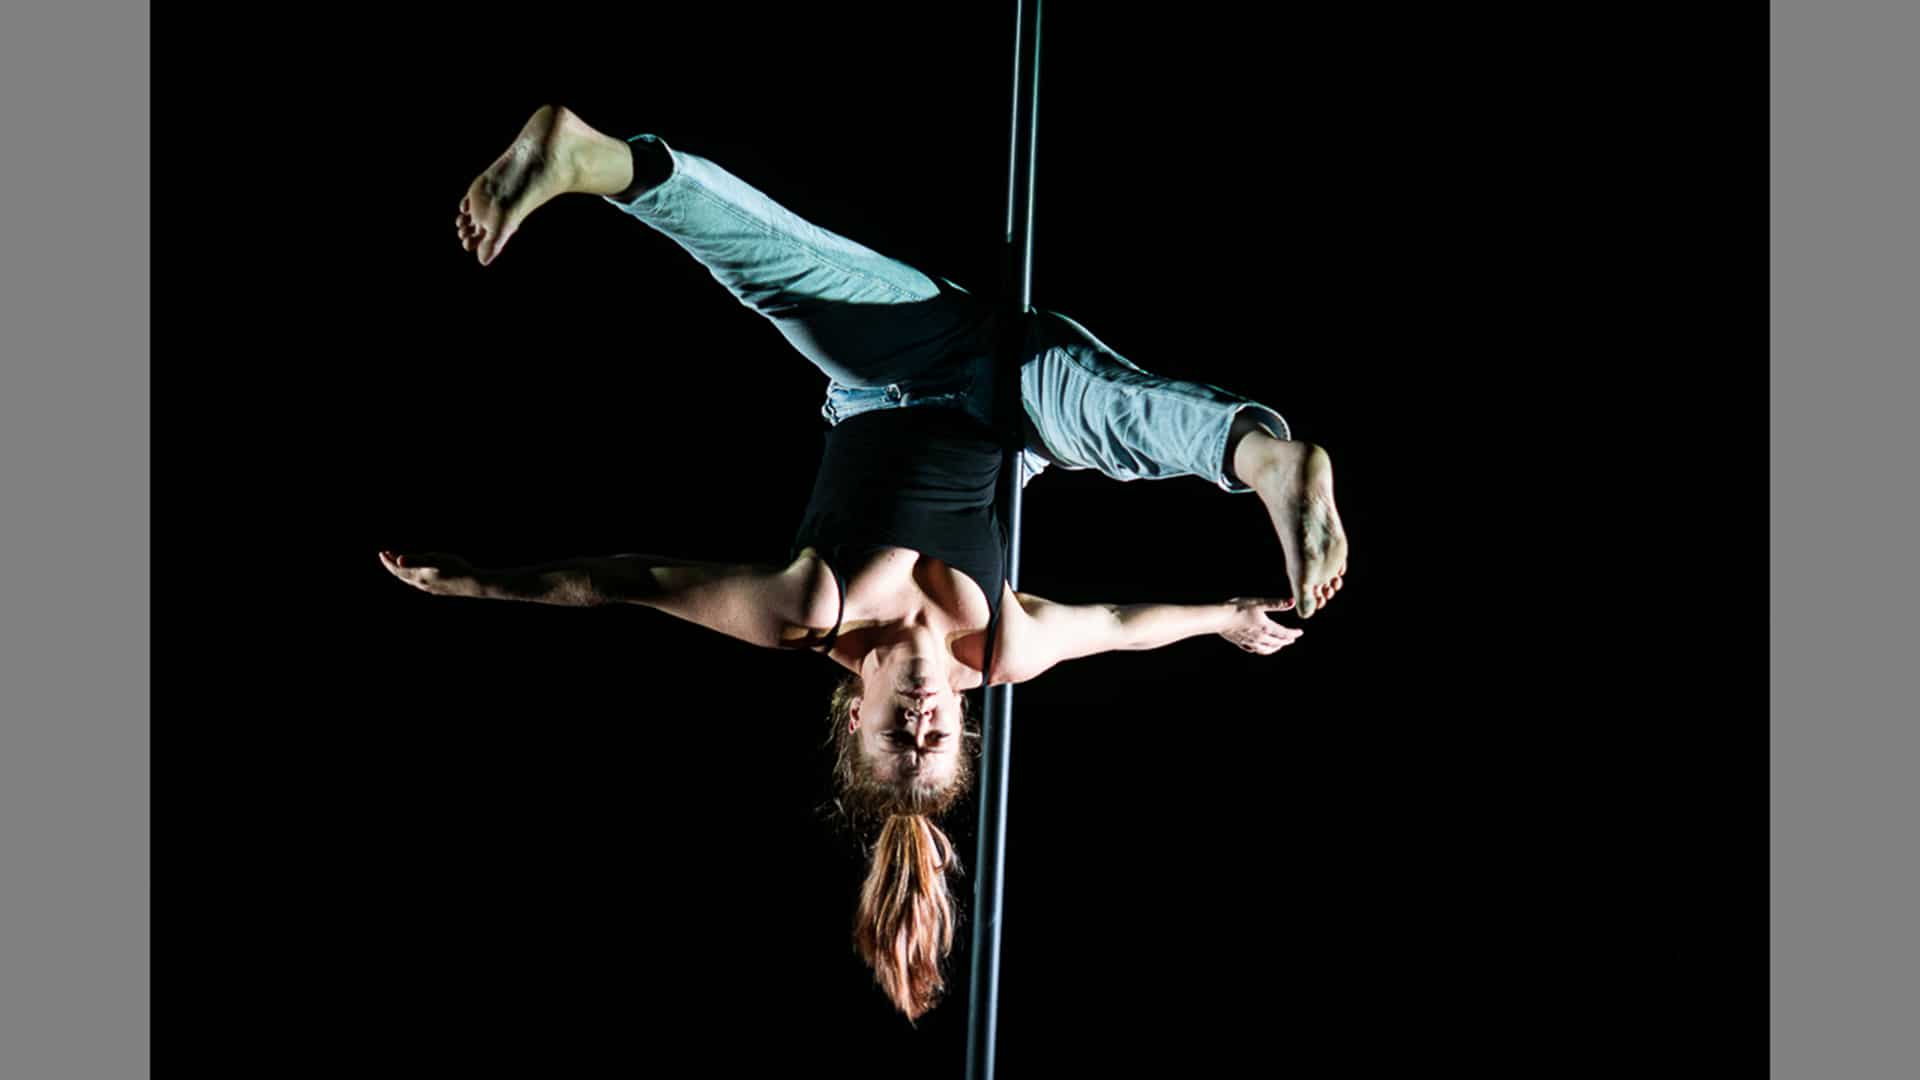 A performer hangs upside down on a Chinese pole, their arms and legs extended out like a starfish